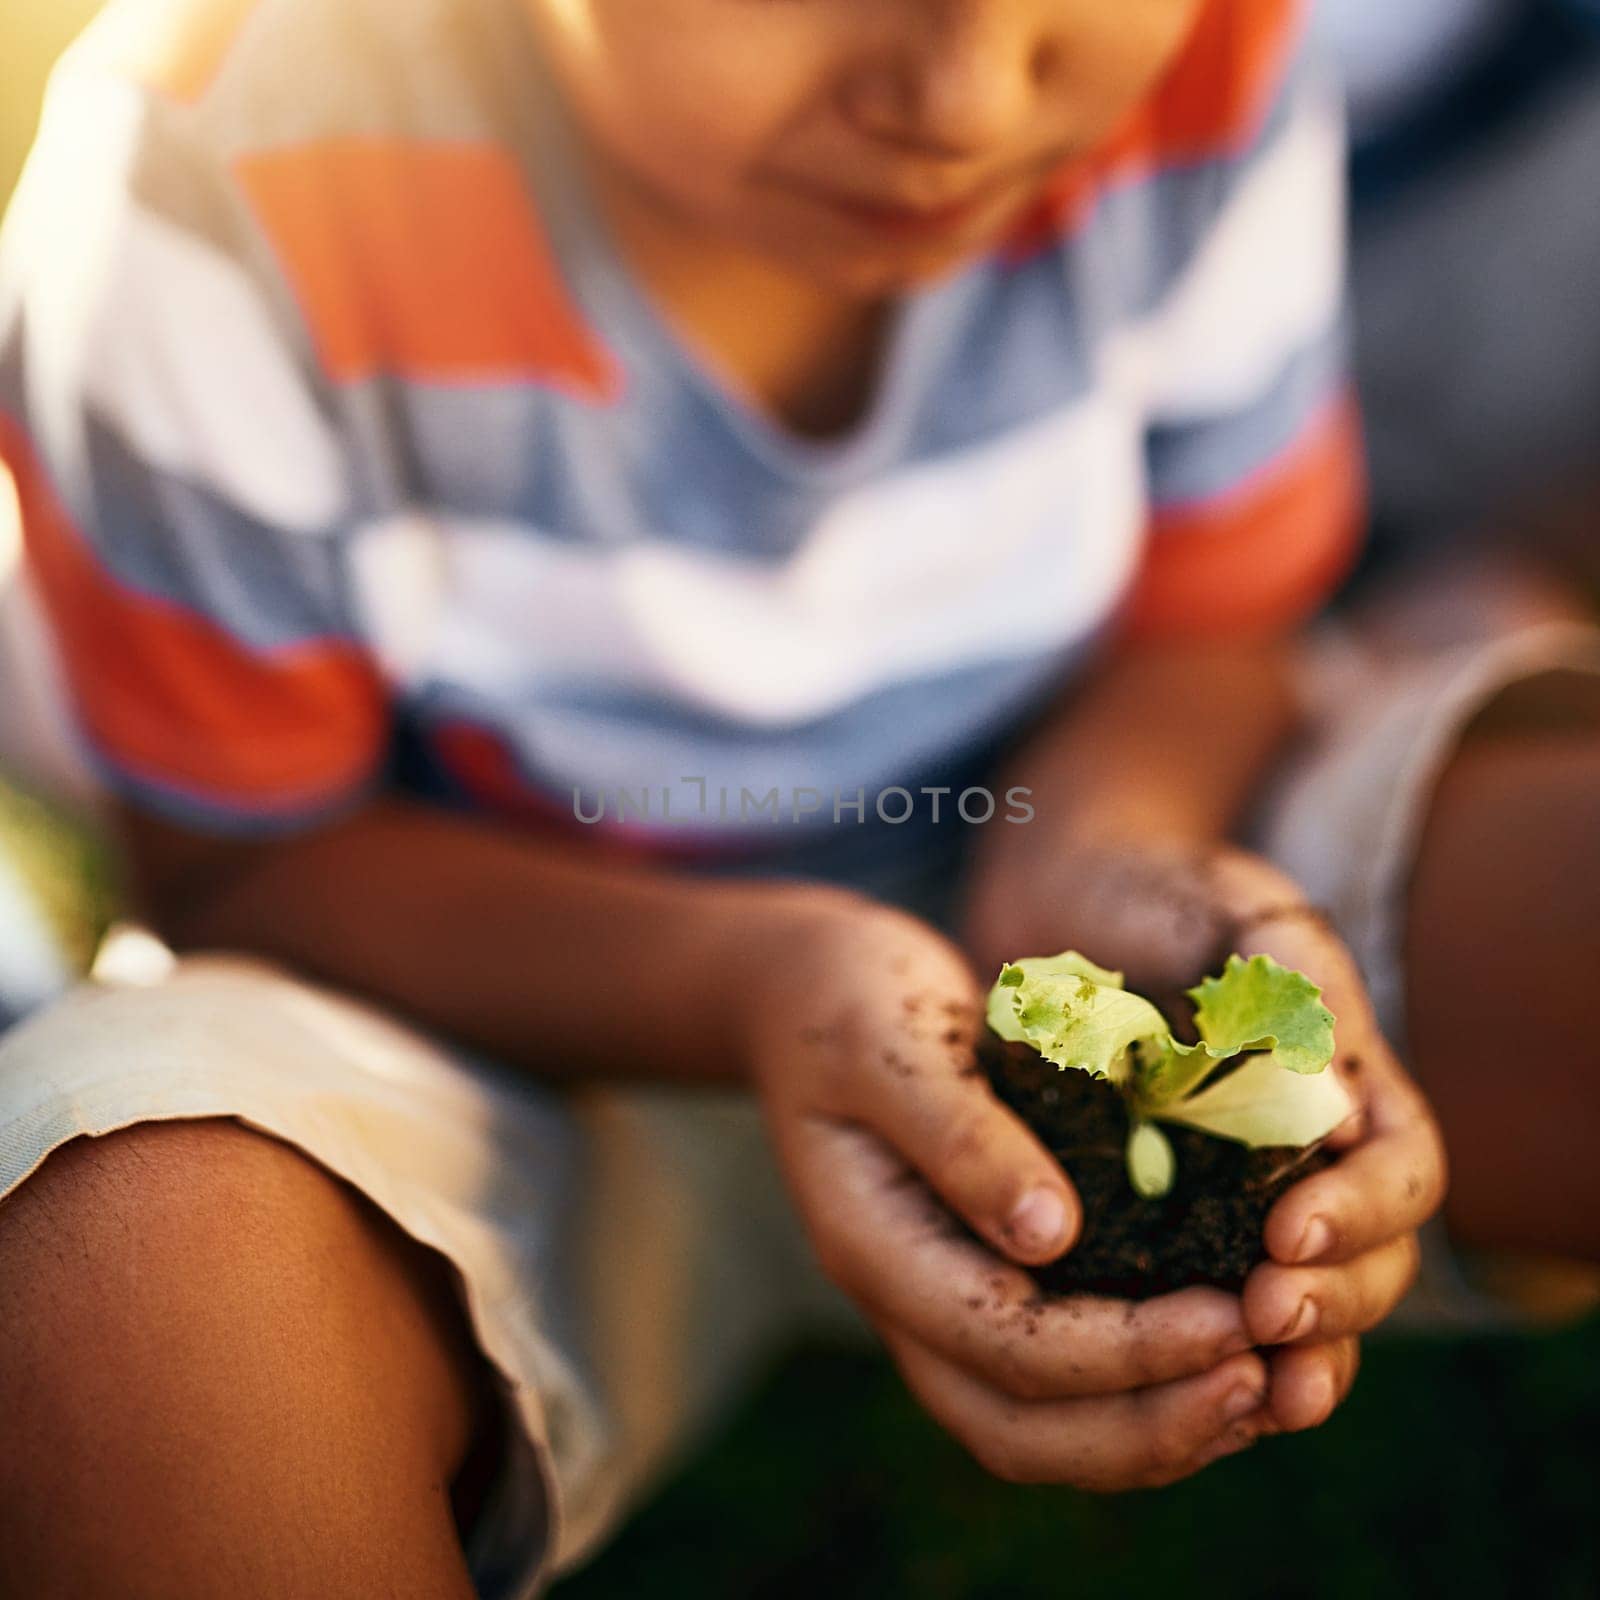 Hands of child, soil or plant in garden for sustainability, agriculture care or farming development. Backyard, natural growth or closeup of blurry kid hand holding sand or planting for learning agro by YuriArcurs